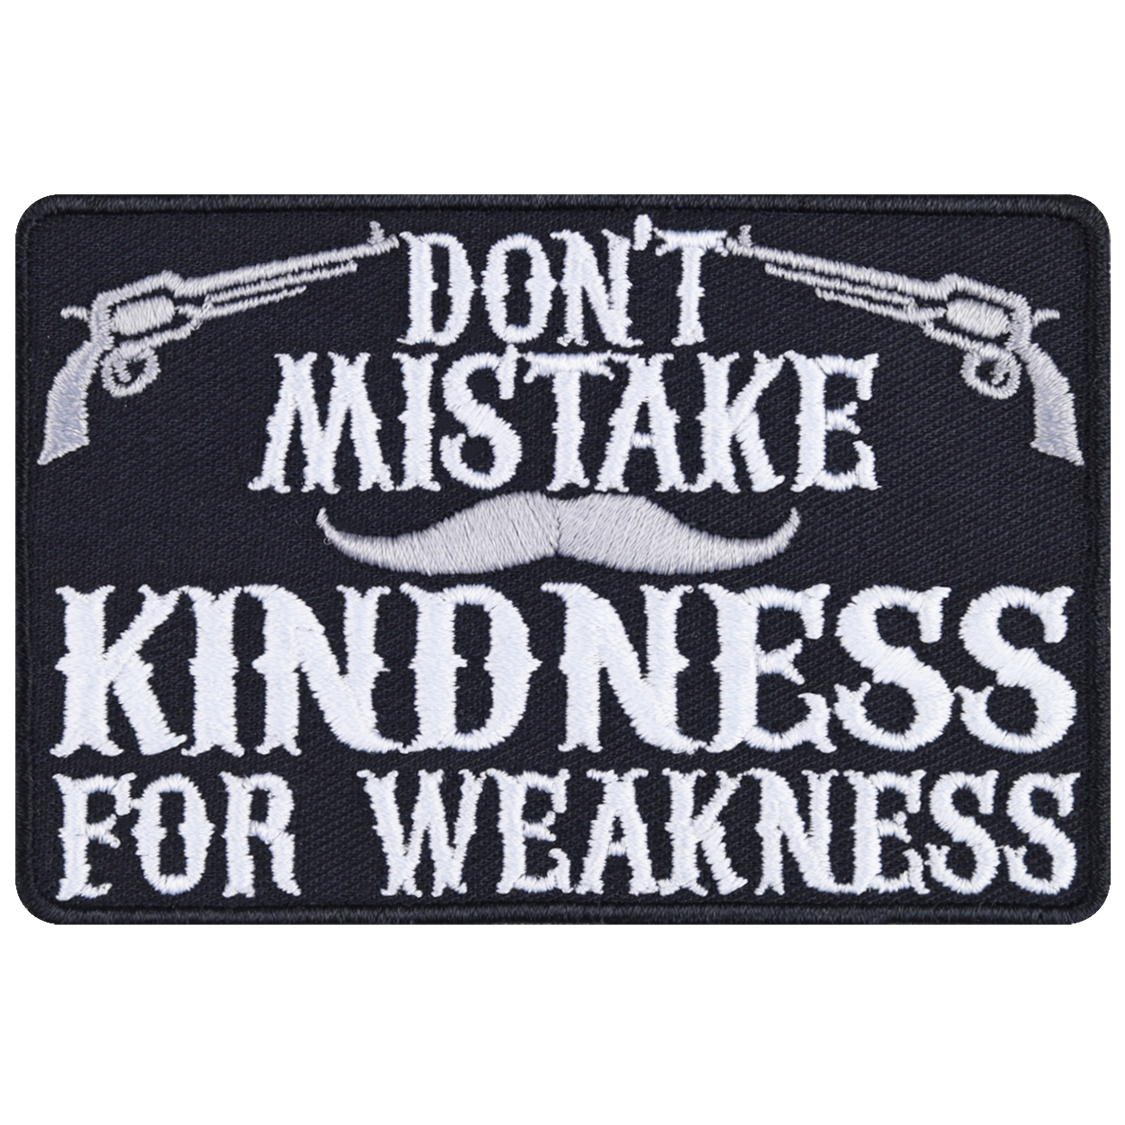 Don't mistake kindness for weakness - Patch